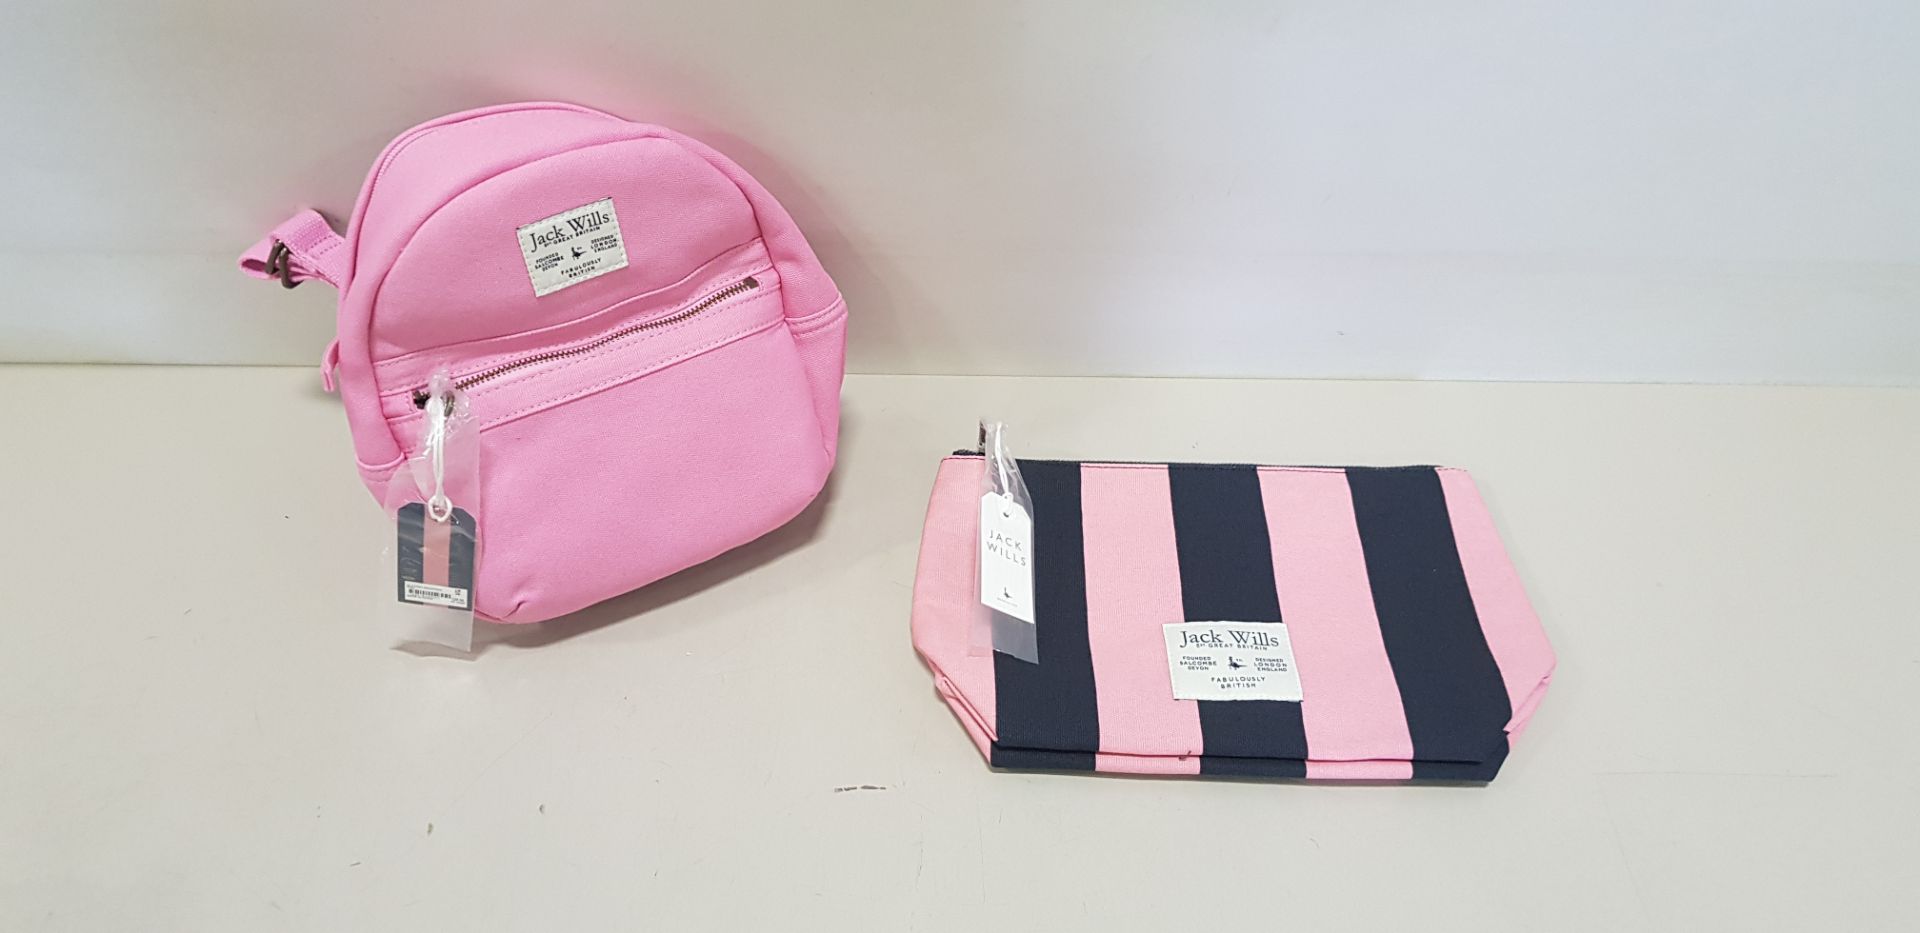 7 X BRAND NEW JACK WILLS BAGS INCLUDING 3 X HAYLE PINK POUCHES AND 4 X ELSTREE PINK BACKPACKS - IN 1